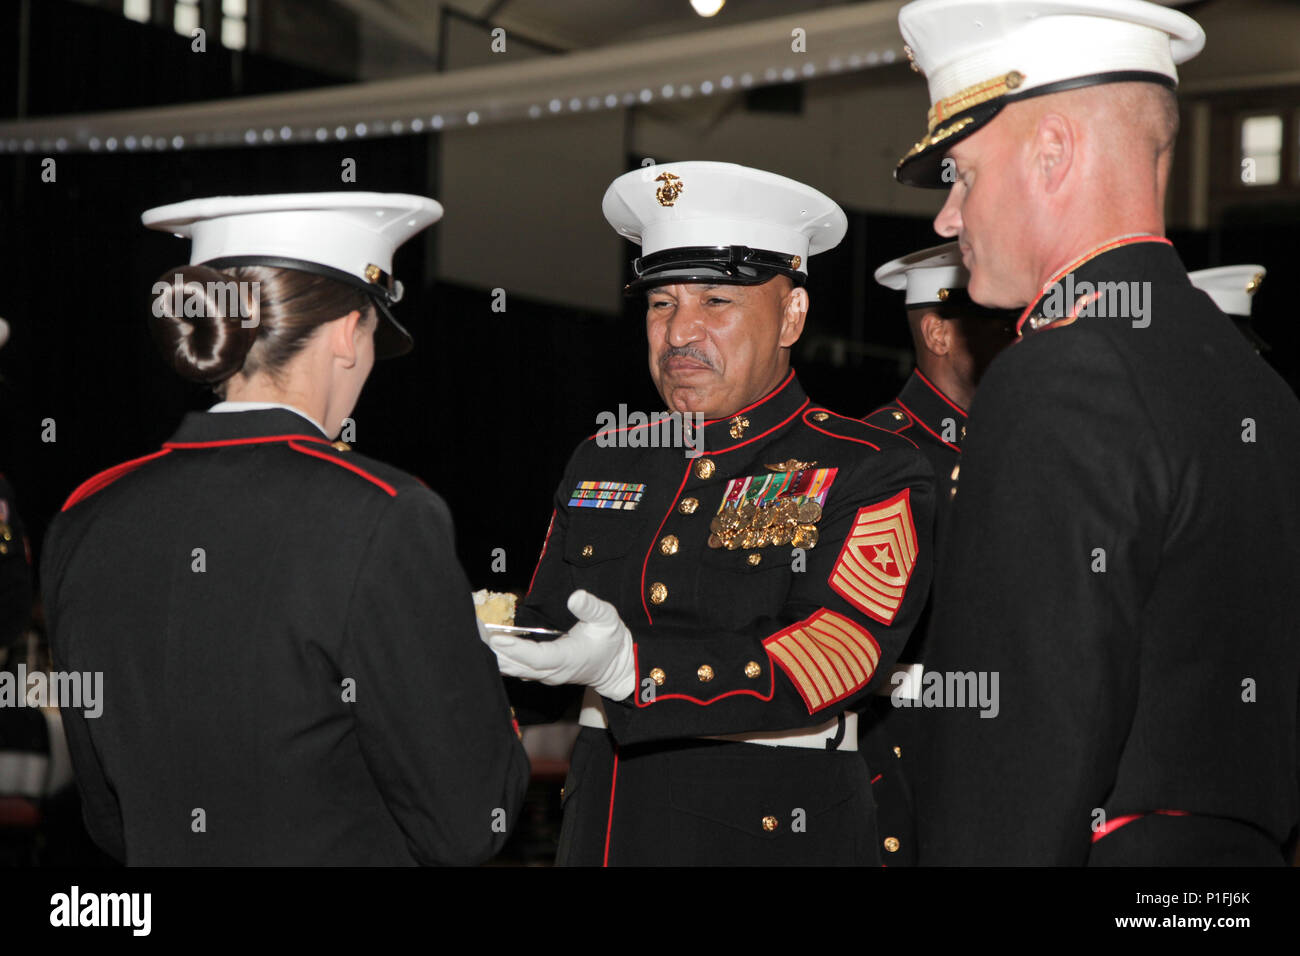 U.S. Marine Corps Sgt. Maj. Miguel A. Rodriguez, center, sergeant major of Marine Corps Combat Service Support Schools (MCCSSS), passes on the slice of cake to the youngest Marine present during the student Marine Corps birthday ball ceremony held at Camp Lejeune, N.C., Oct. 29, 2016. Students from Financial Management School, Ground Supply School, Personnel Administration School, and Logistics Operations School attended their first Marine Corps Ball to celebrate the 241st Marine Corps Birthday. (U.S. Marine Corps photo by Lance Cpl. Jose D. Villalobosrocha) Stock Photo